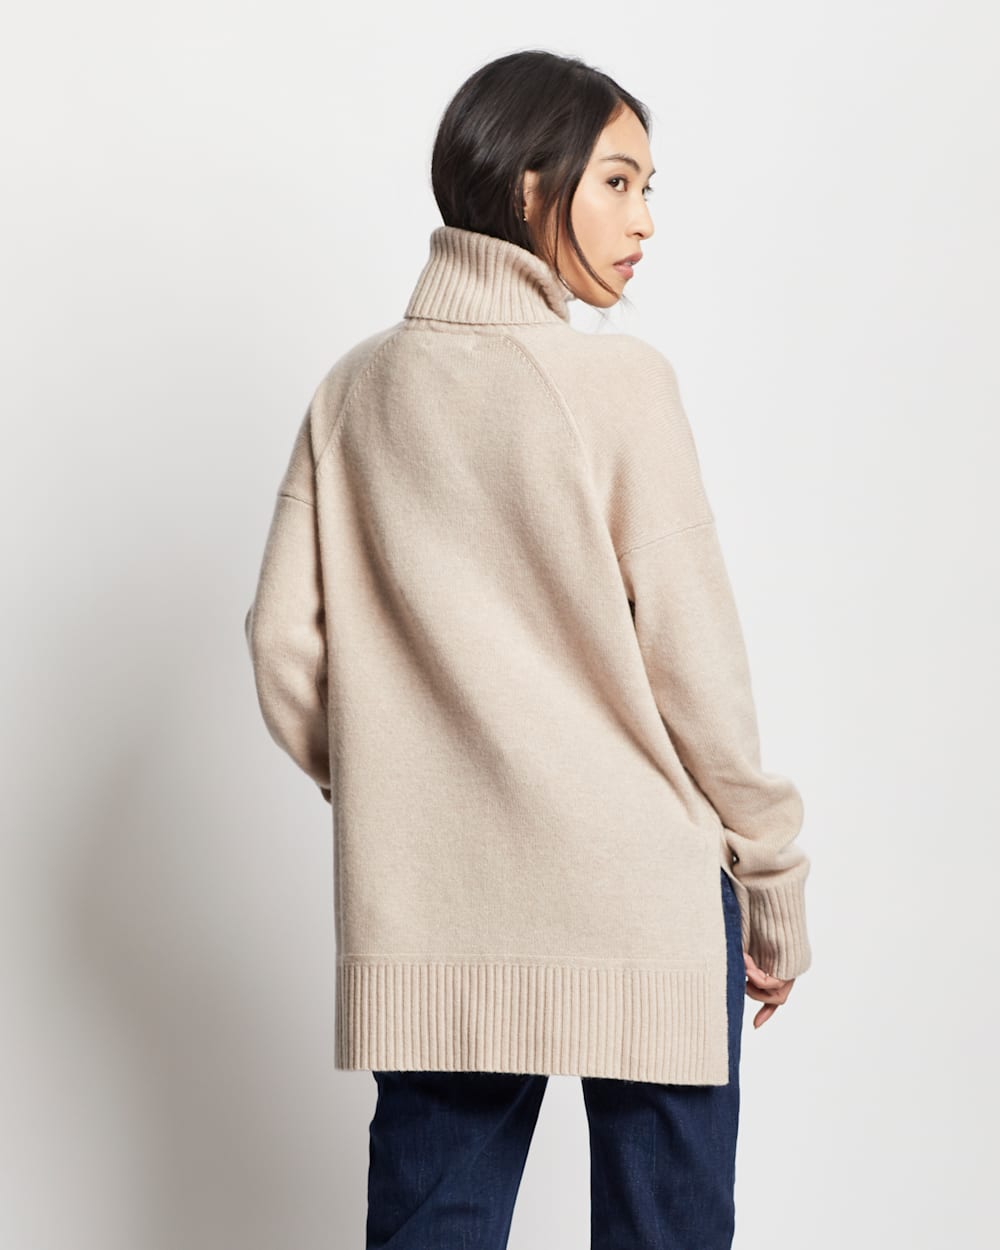 ALTERNATE VIEW OF WOMEN'S MERINO/CASHMERE OVERSIZED TURTLENECK IN WHEAT image number 3